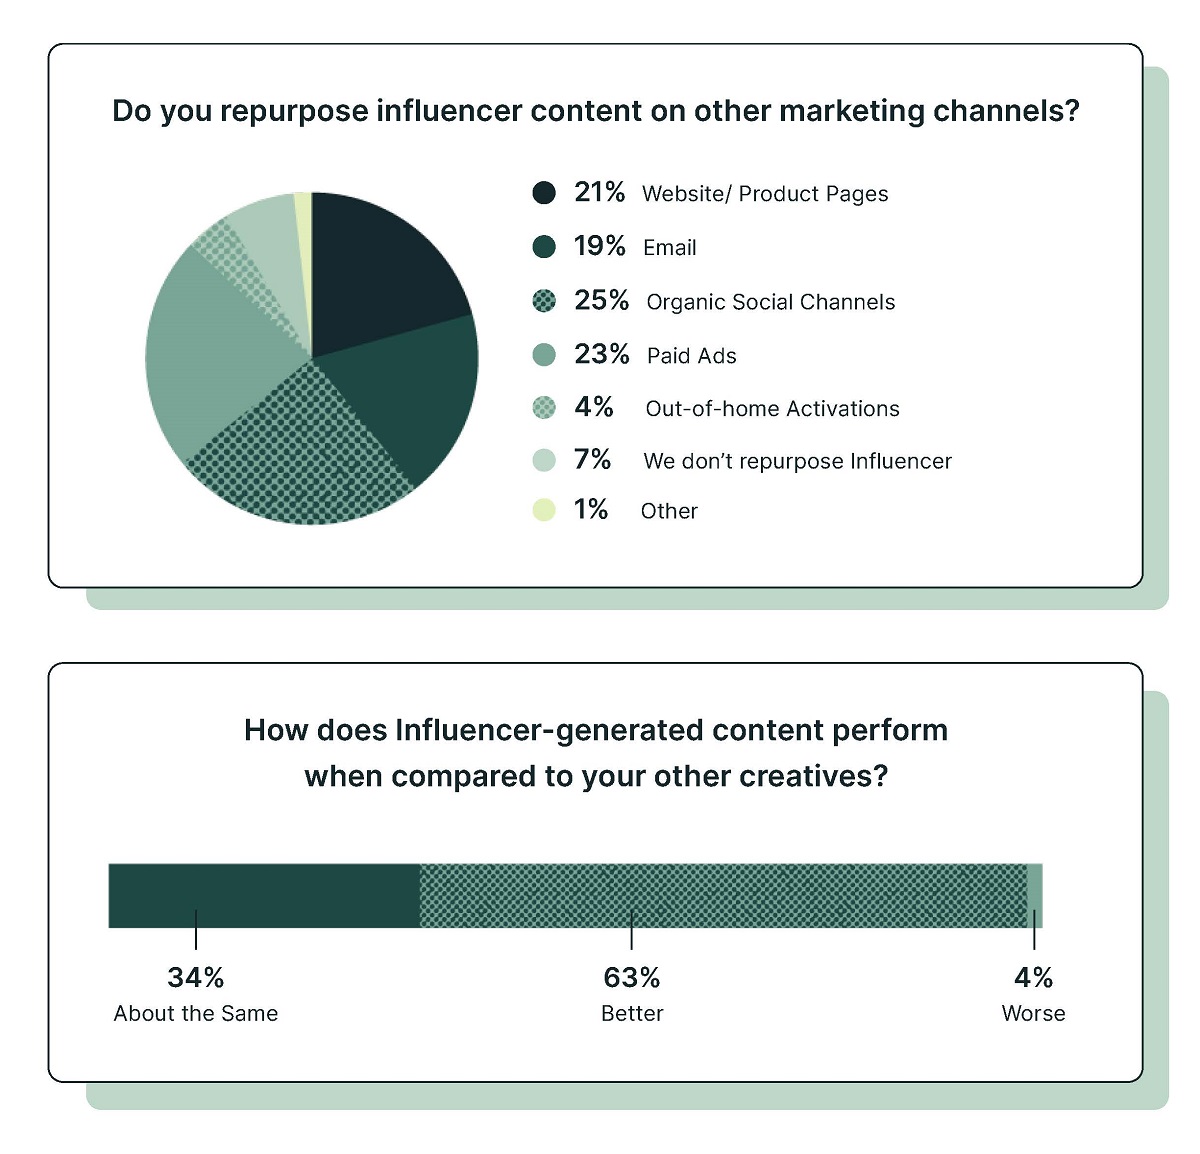 Influencer-generated content (IGC) is a powerful tool that brands can use across the entire buyer’s journey to drive awareness, engagement, and conversions, with 63% of marketers saying IGC performs better than other brand-directed content. Cr: Aspire